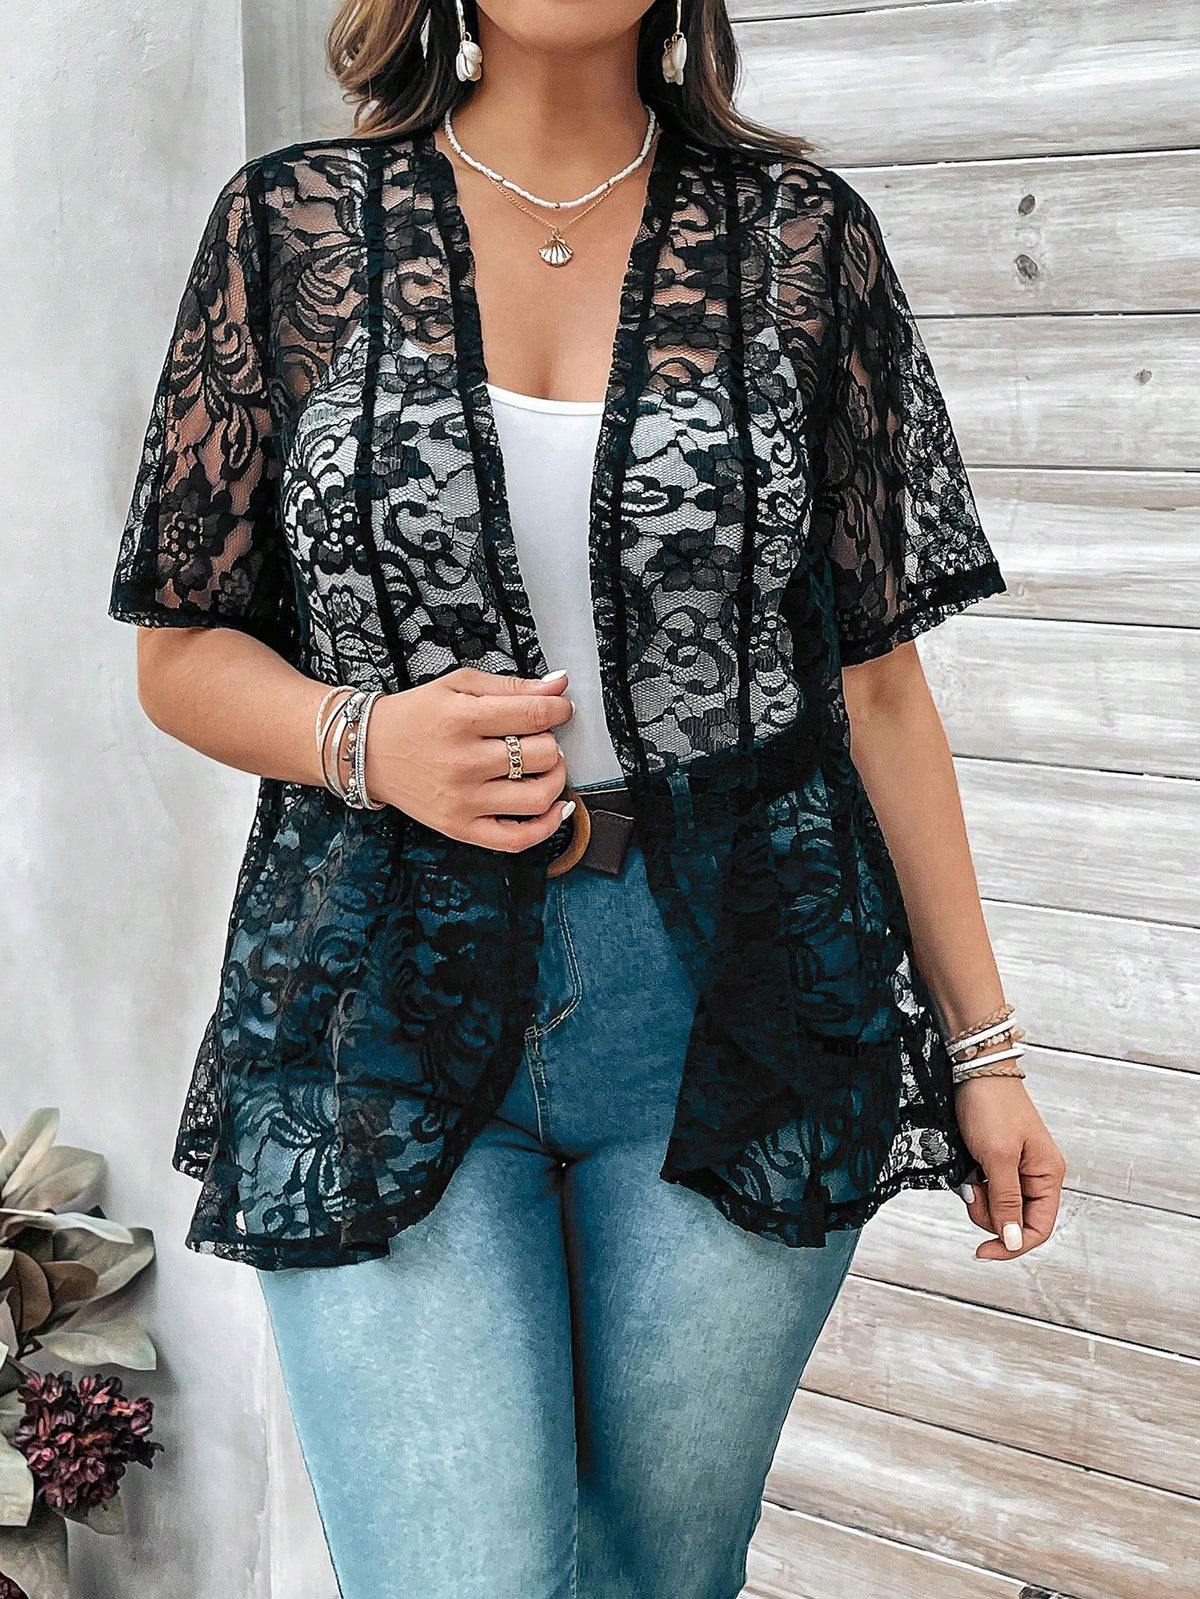 EMERY ROSE Plus Size Women'S Lace Open Front Cardigan For Spring